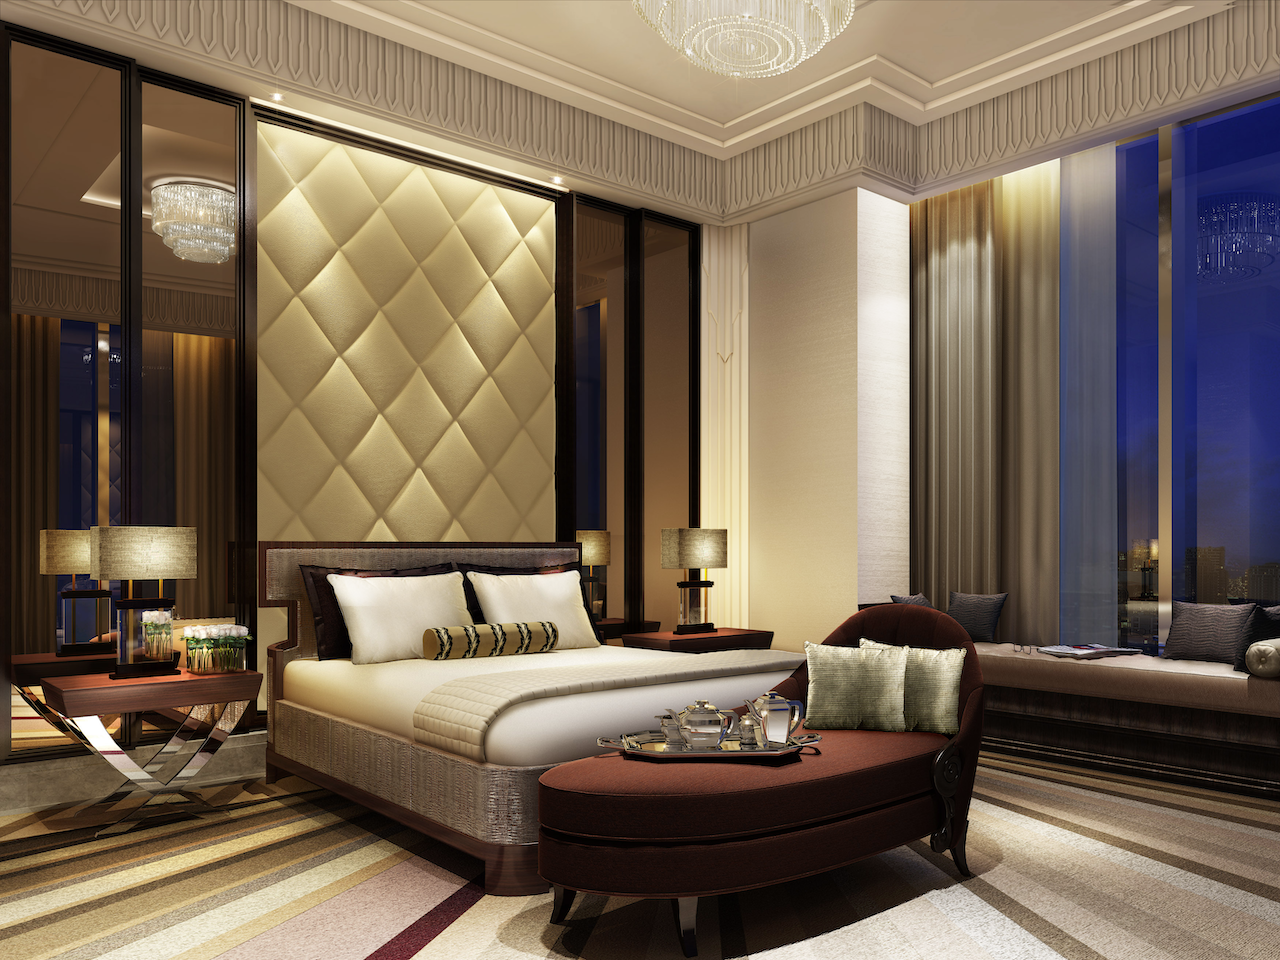 The St. Regis Chengdu brings new levels of luxury and sophistication to one of China’s most historic cities.